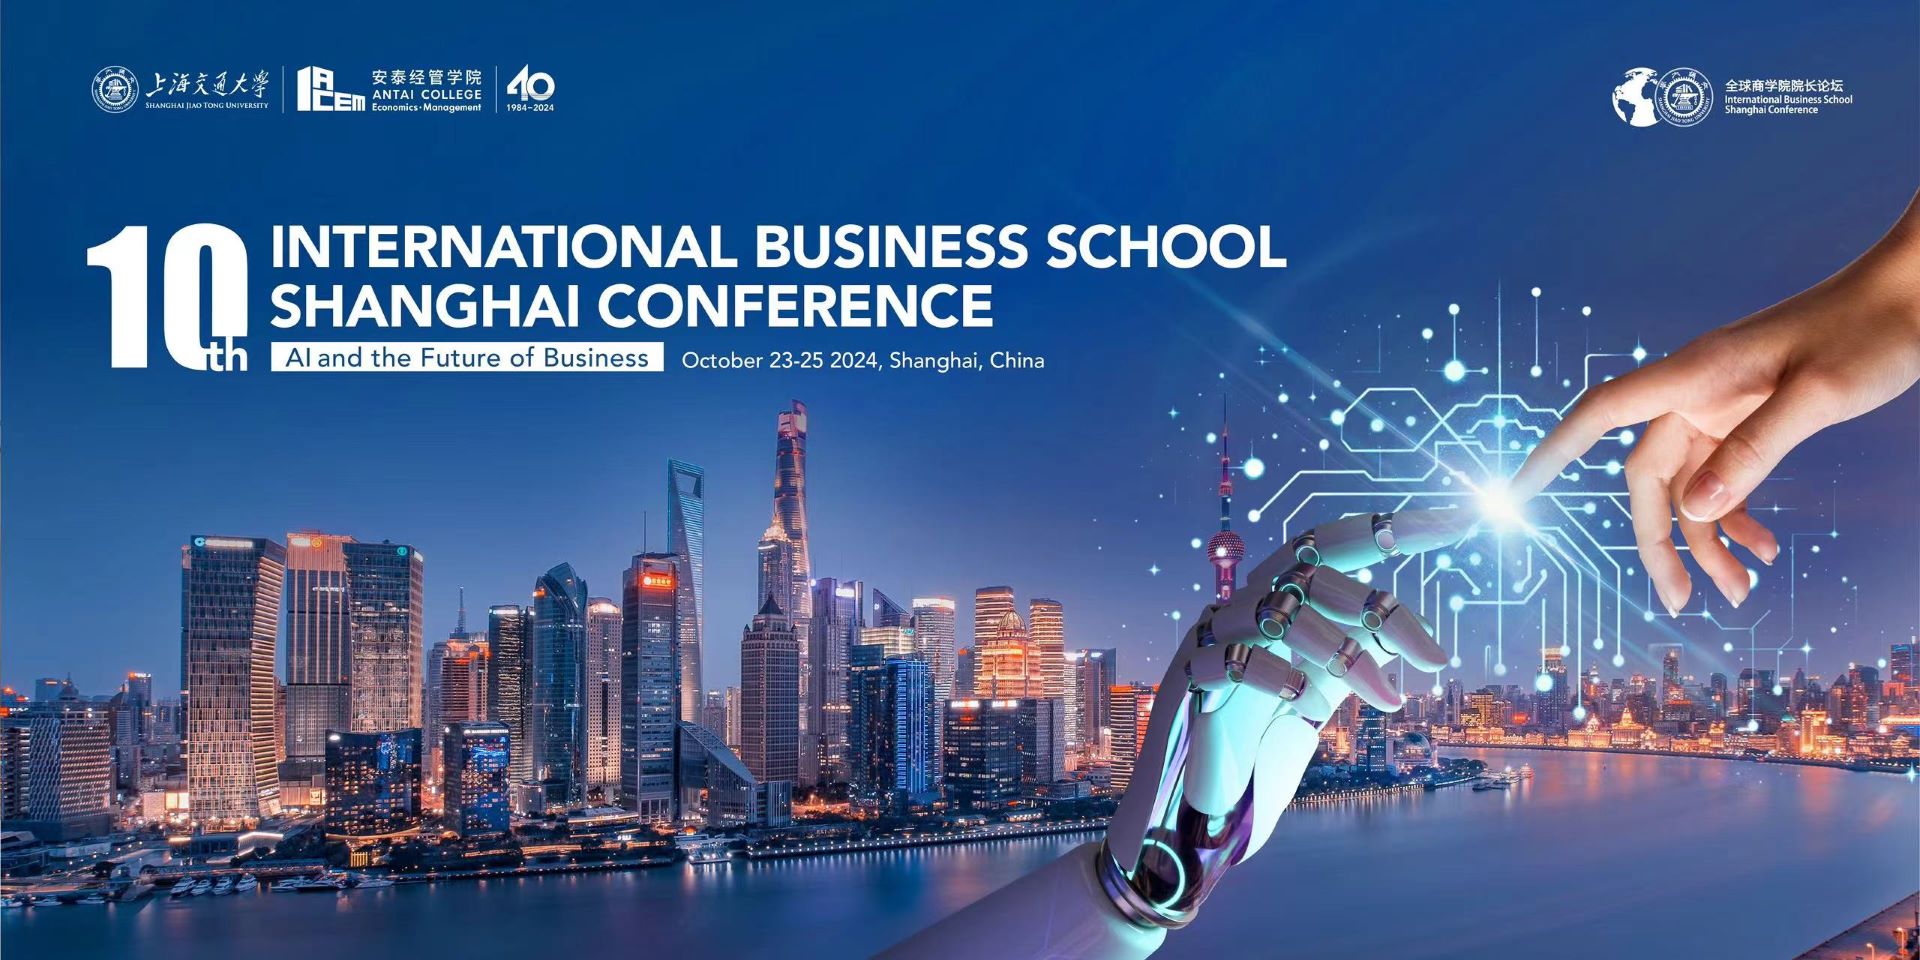 The 2024 International Business School Shanghai Conference (IBSSC) Open for Registration